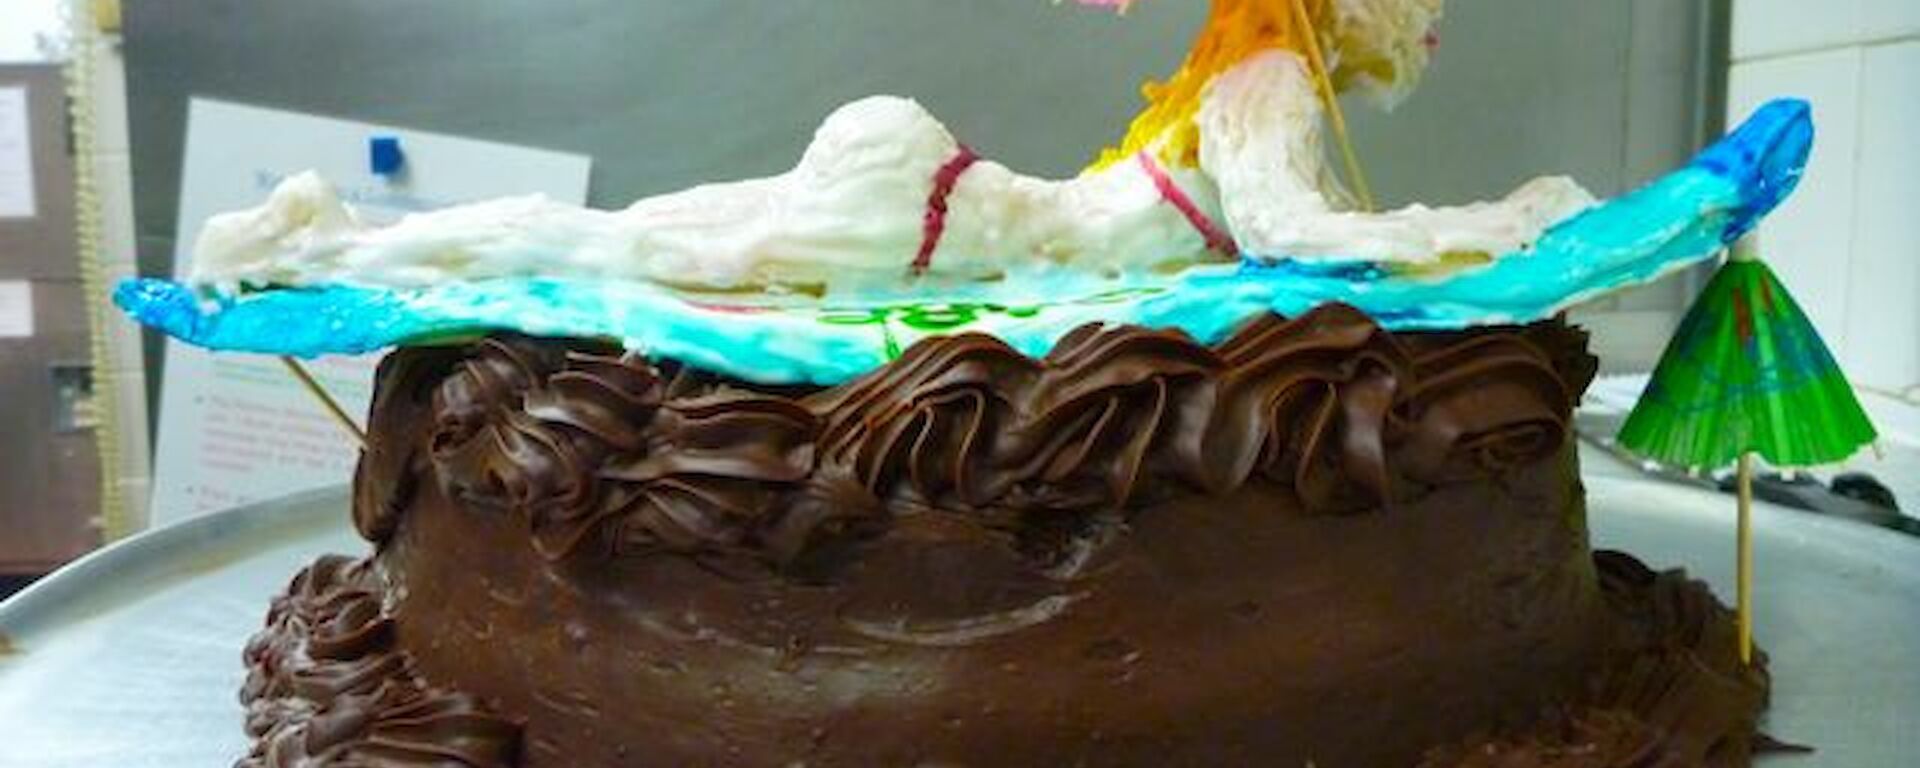 A surfing beauty — cake with surfer on top made by Belinda